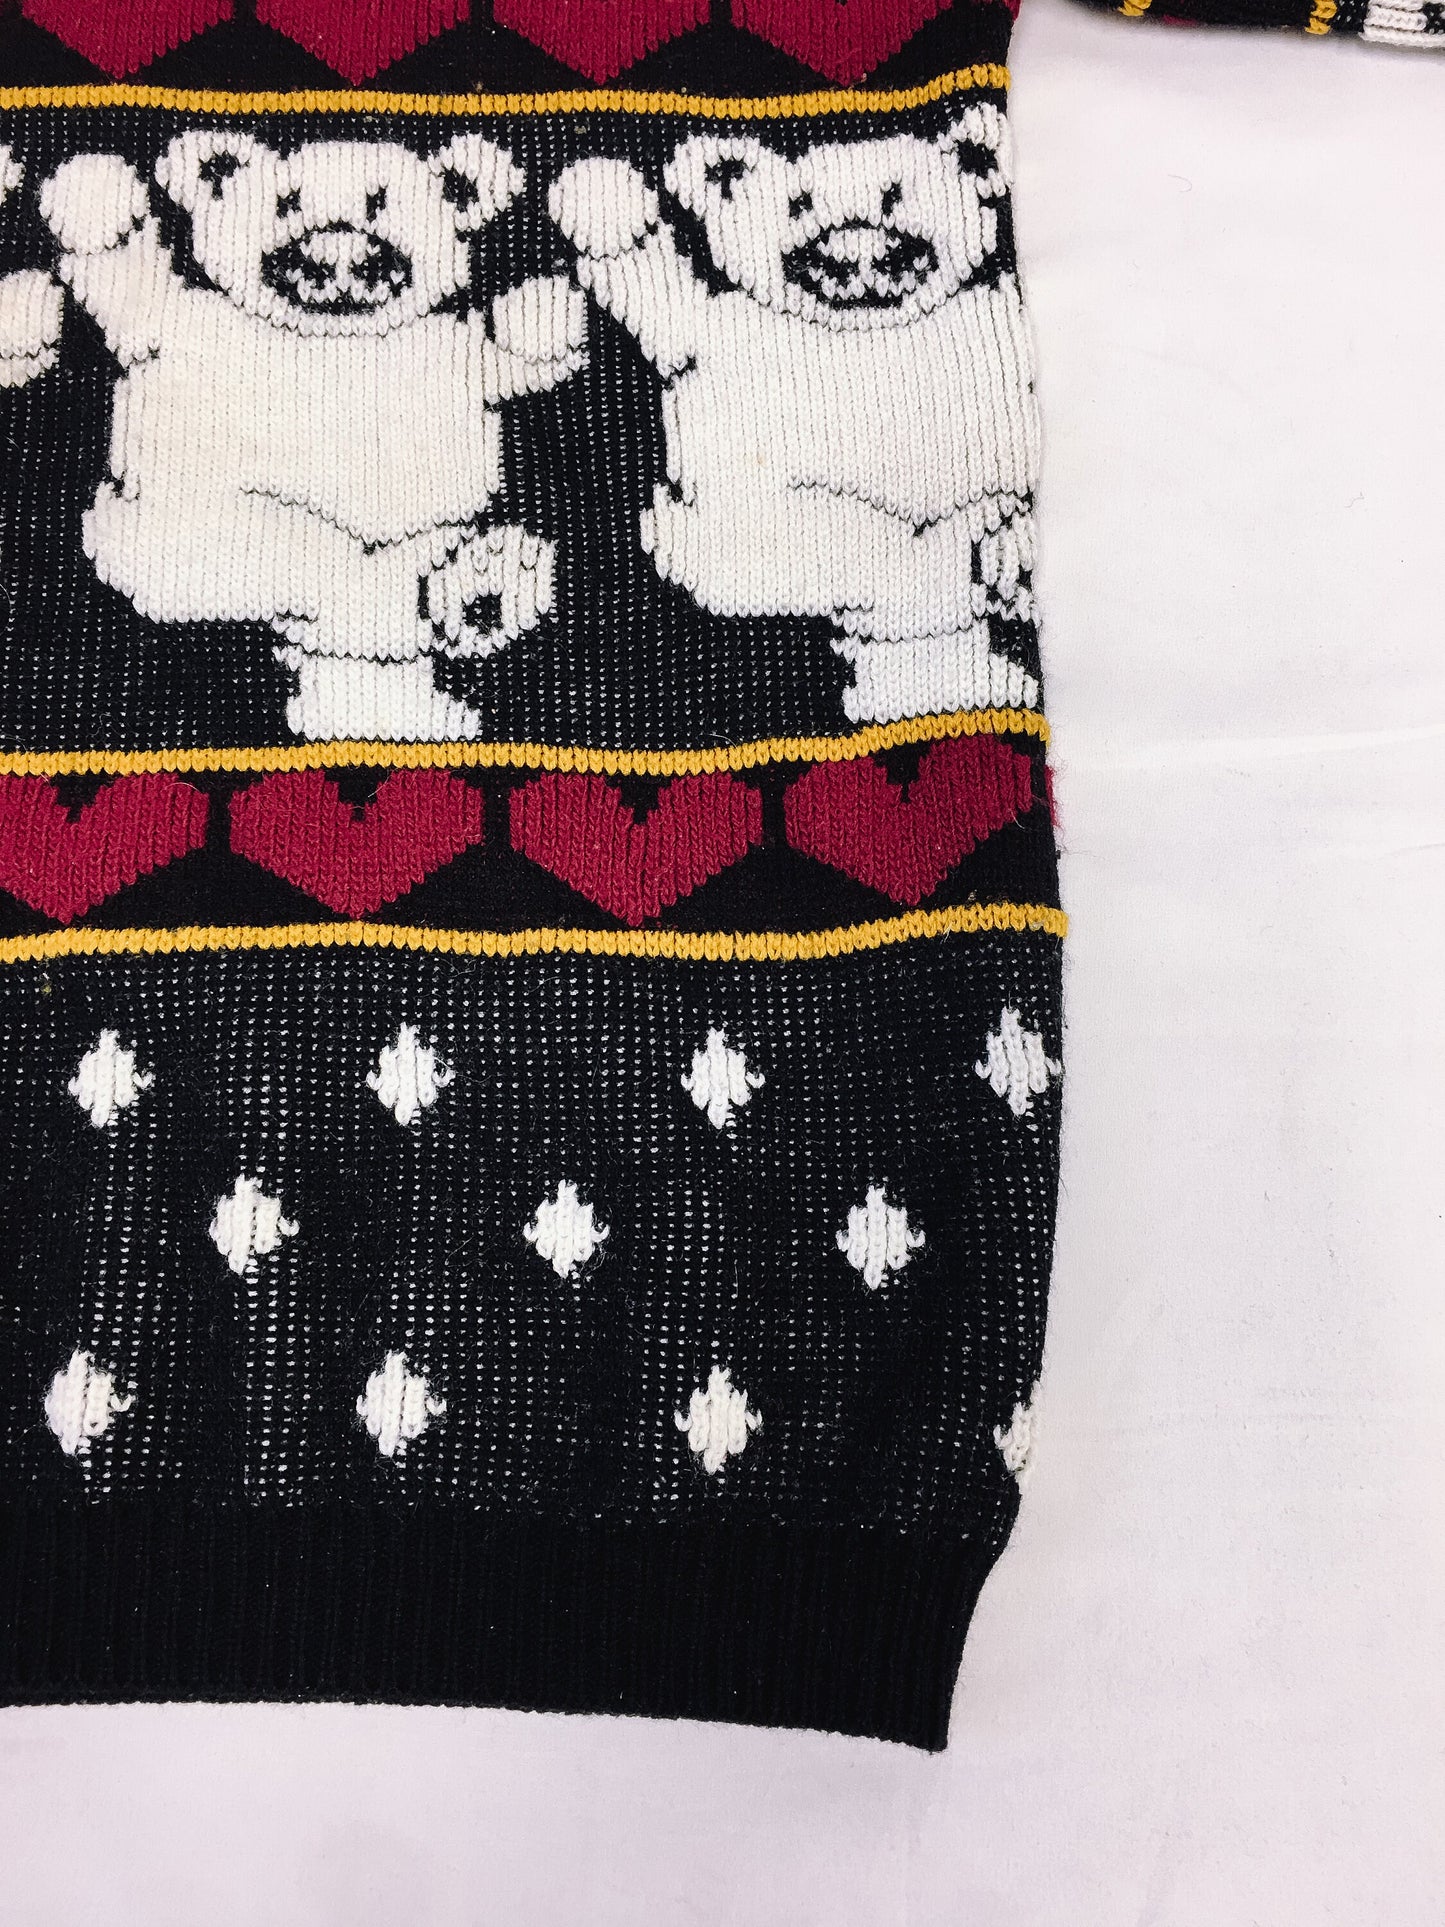 Vintage 1980s/1990s Delivery Ltd. Bear and Heart Crewneck Sweater, 80s/90s Valentine's Day Sweater, Made in USA